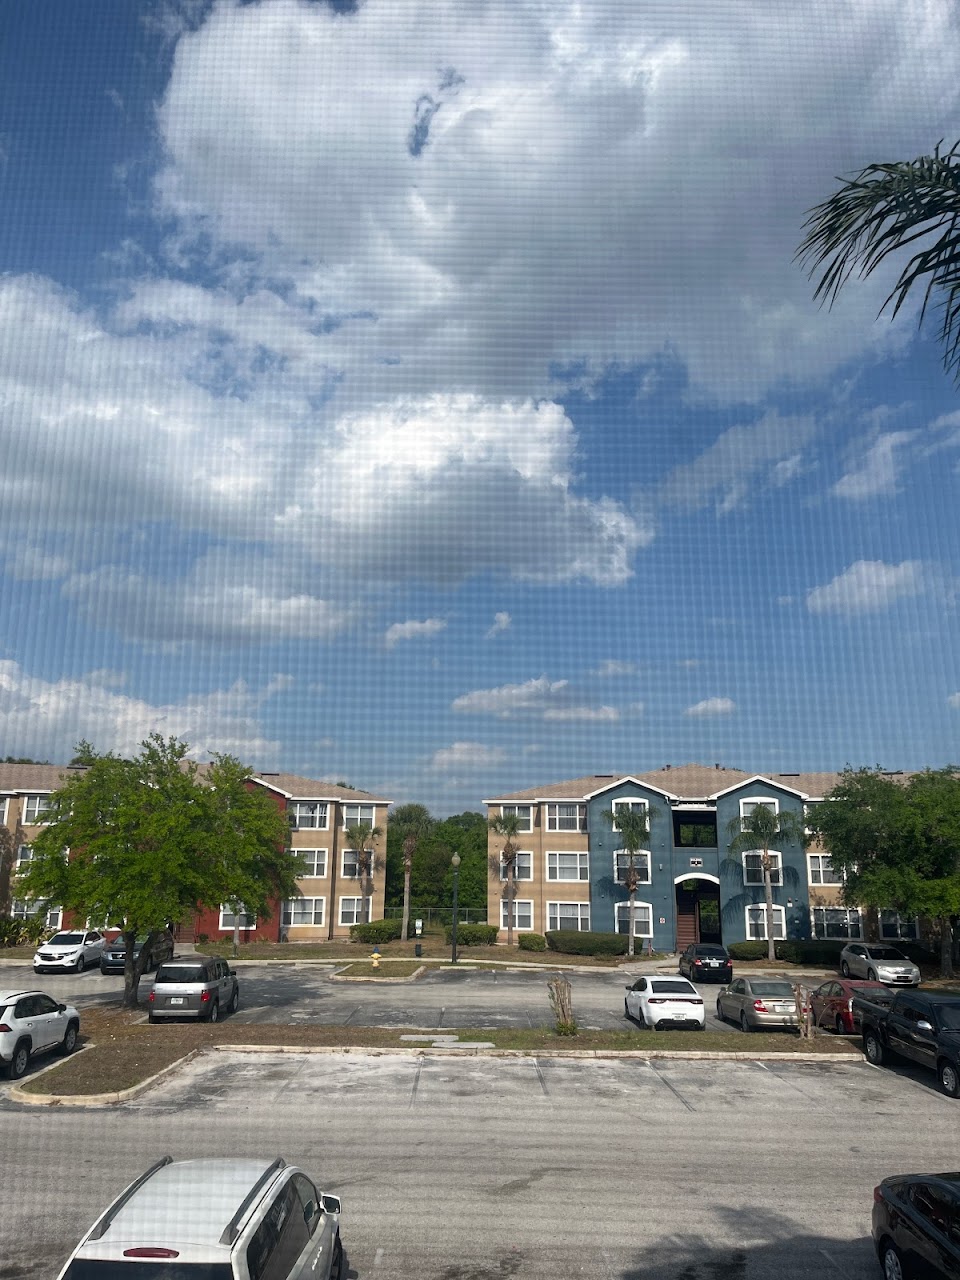 Photo of VILLAS AT LAKE SMART. Affordable housing located at 3900 STATE RD WINTER HAVEN, FL 